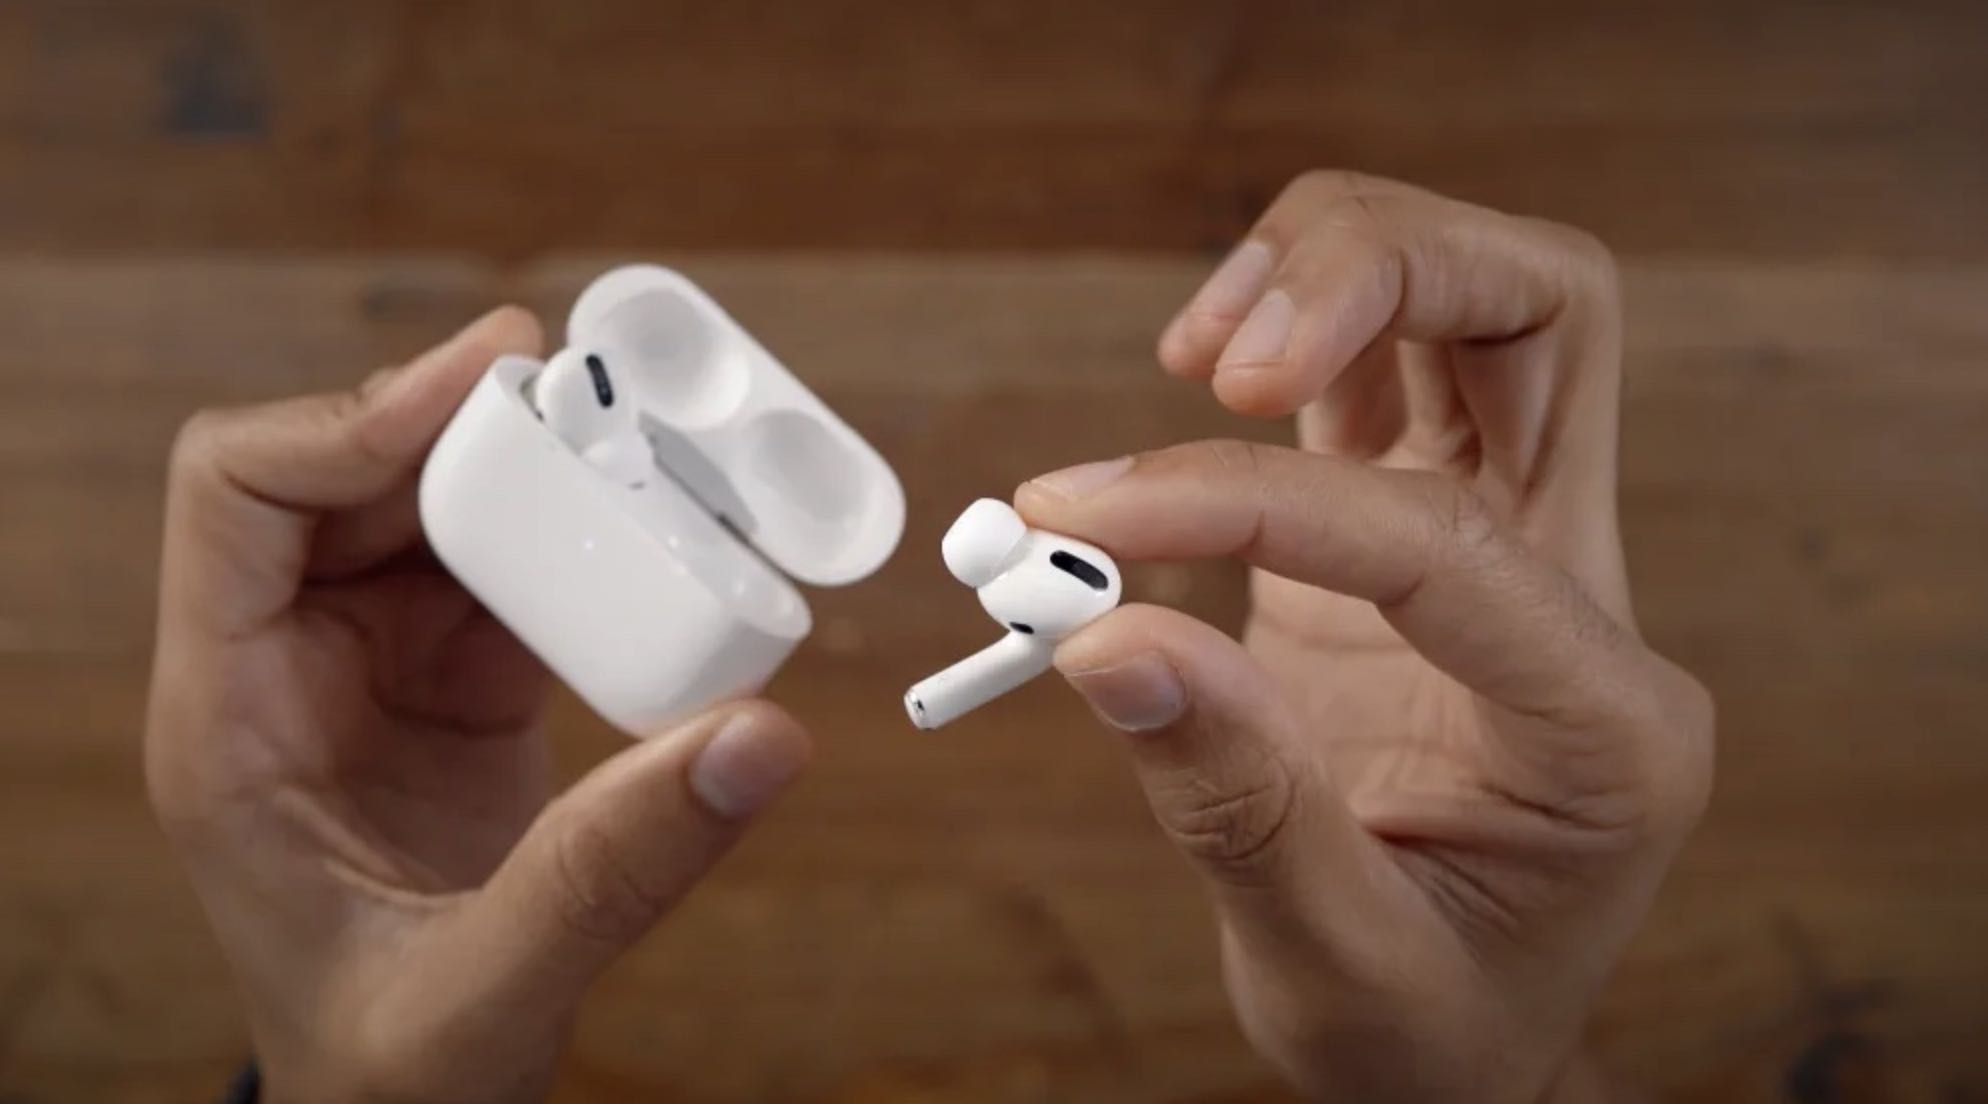 1st gen AirPods Pro users seeing 'Adaptive Transparency' option after iOS 16.1 beta update.